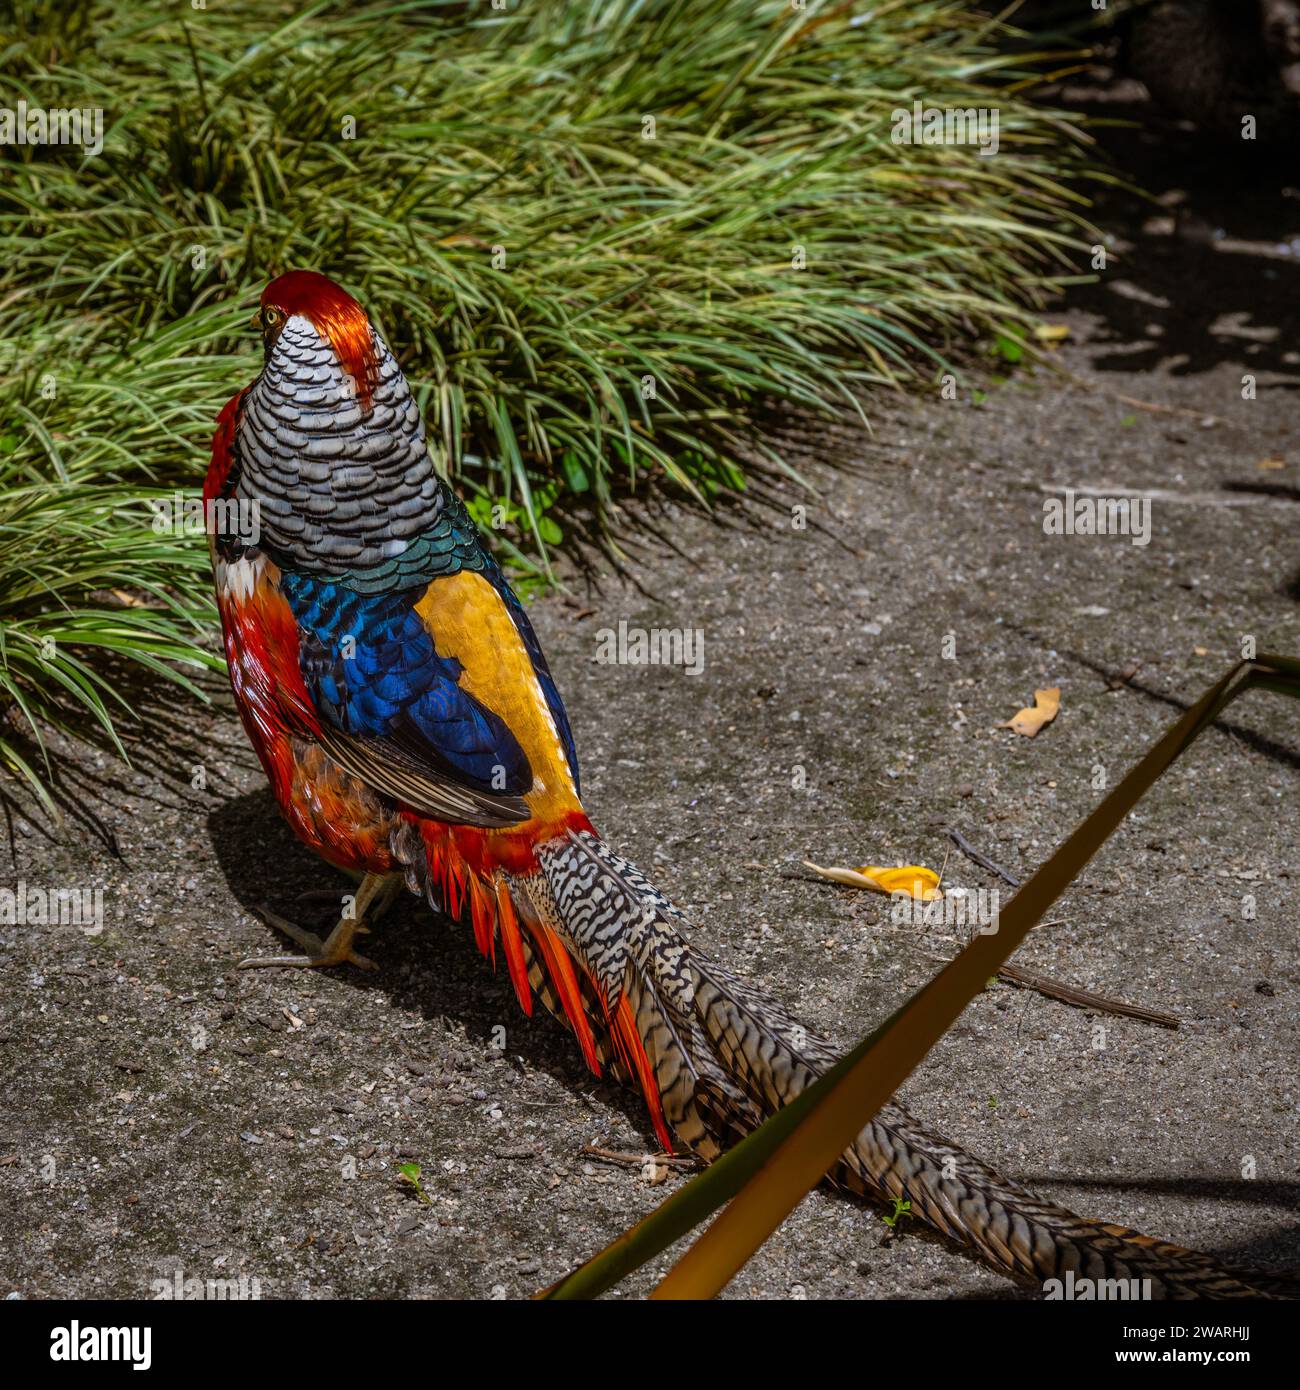 A Lady Amherst pheasant in botanical garden, beautiful bird, bright colorful plumage and a long black and white striped tail stock photography Stock Photo